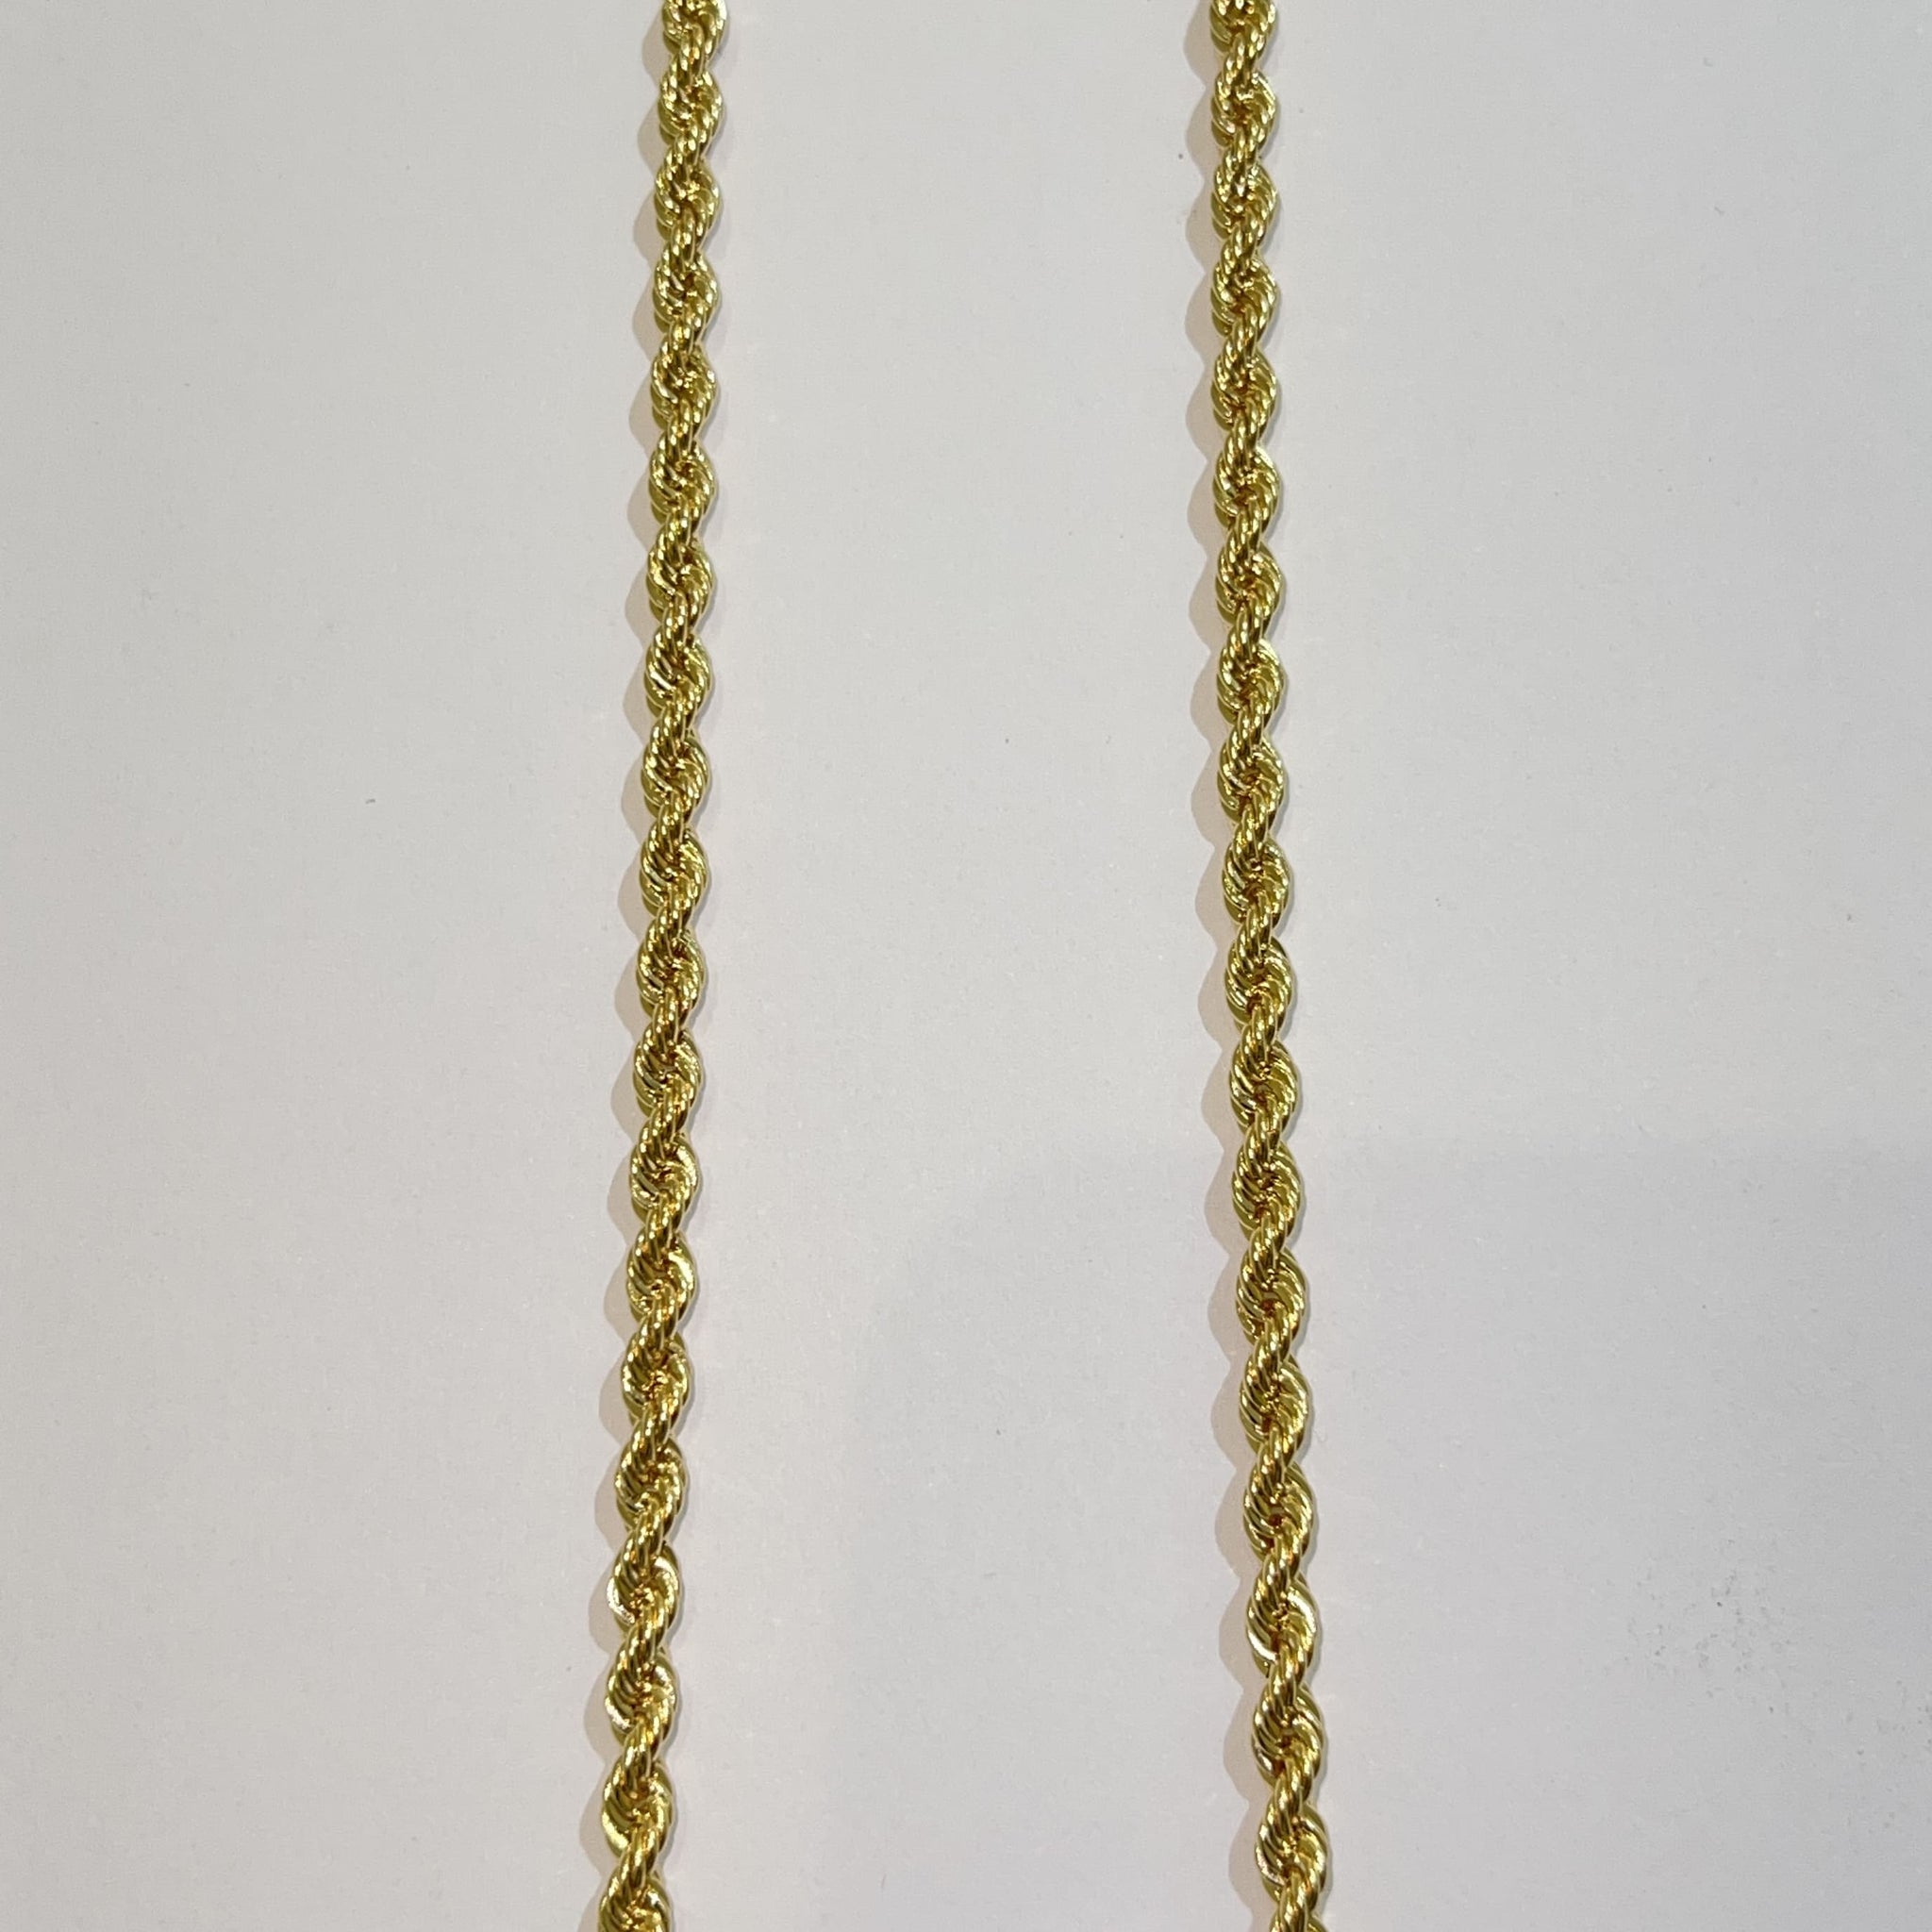 Rope Chain - 18 carat gold - 3.8mm / 60cm